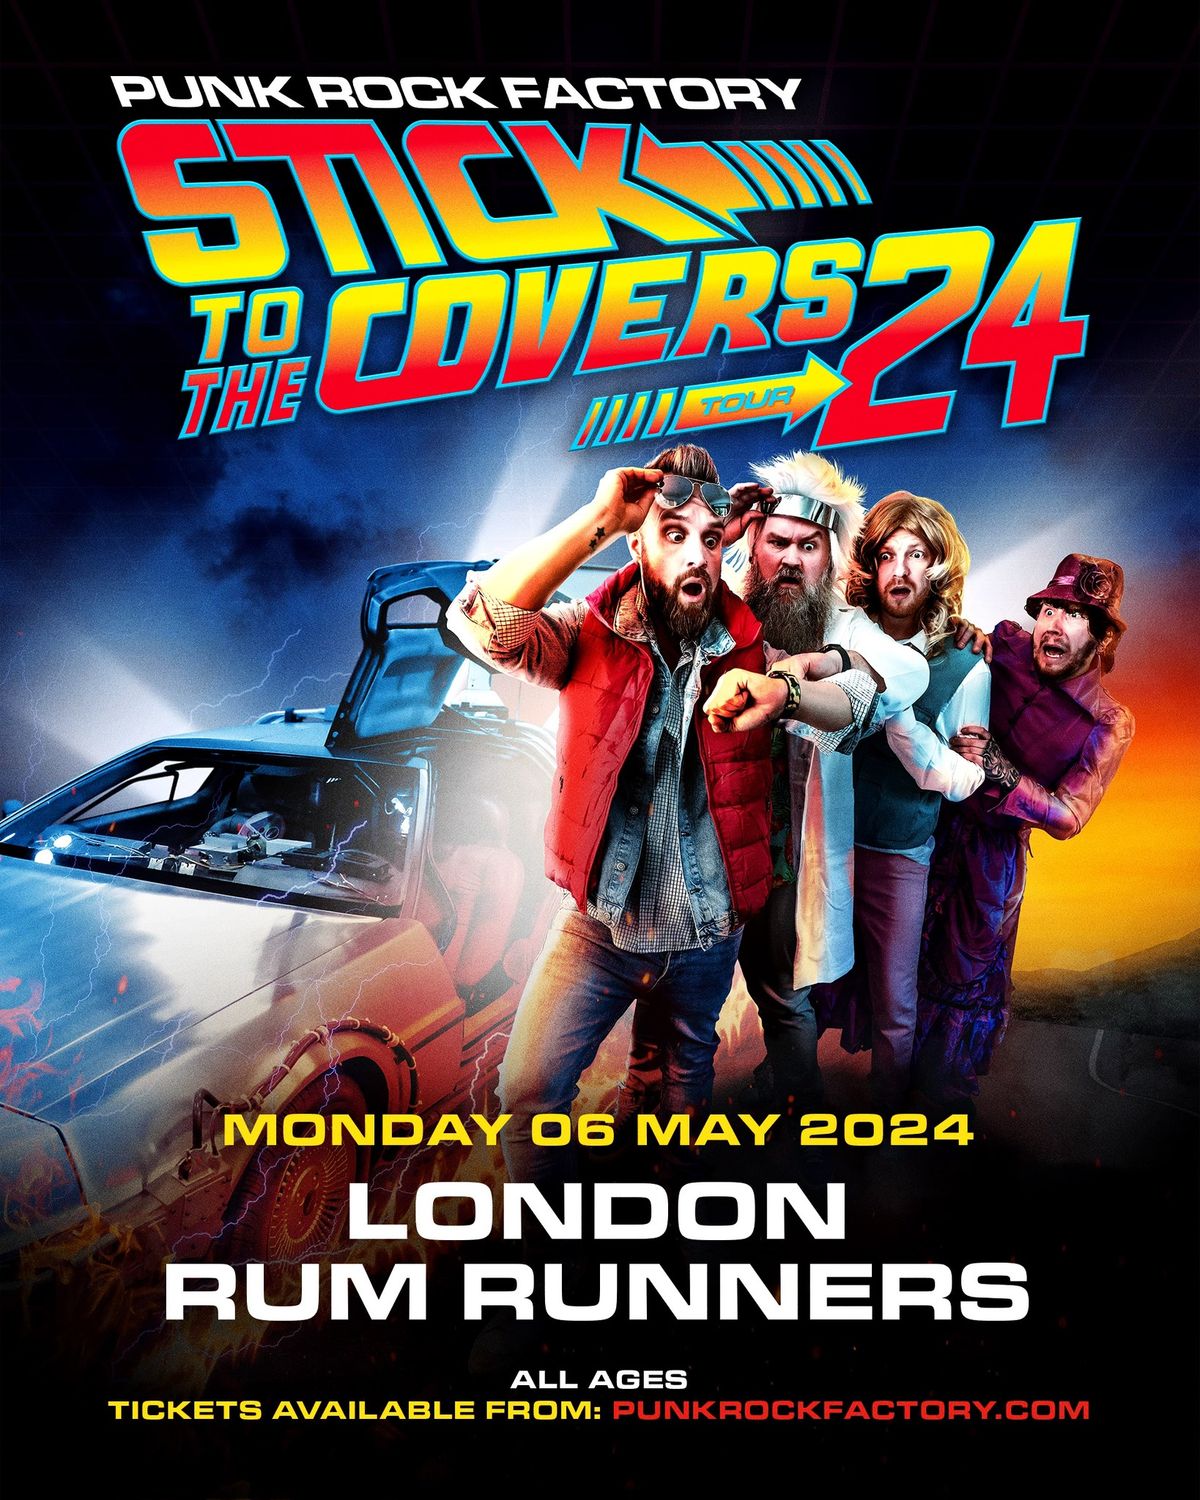 PUNK ROCK FACTORY: Stick To The Covers Tour w\/ Full Throttle - May 6th @ Rum Runners